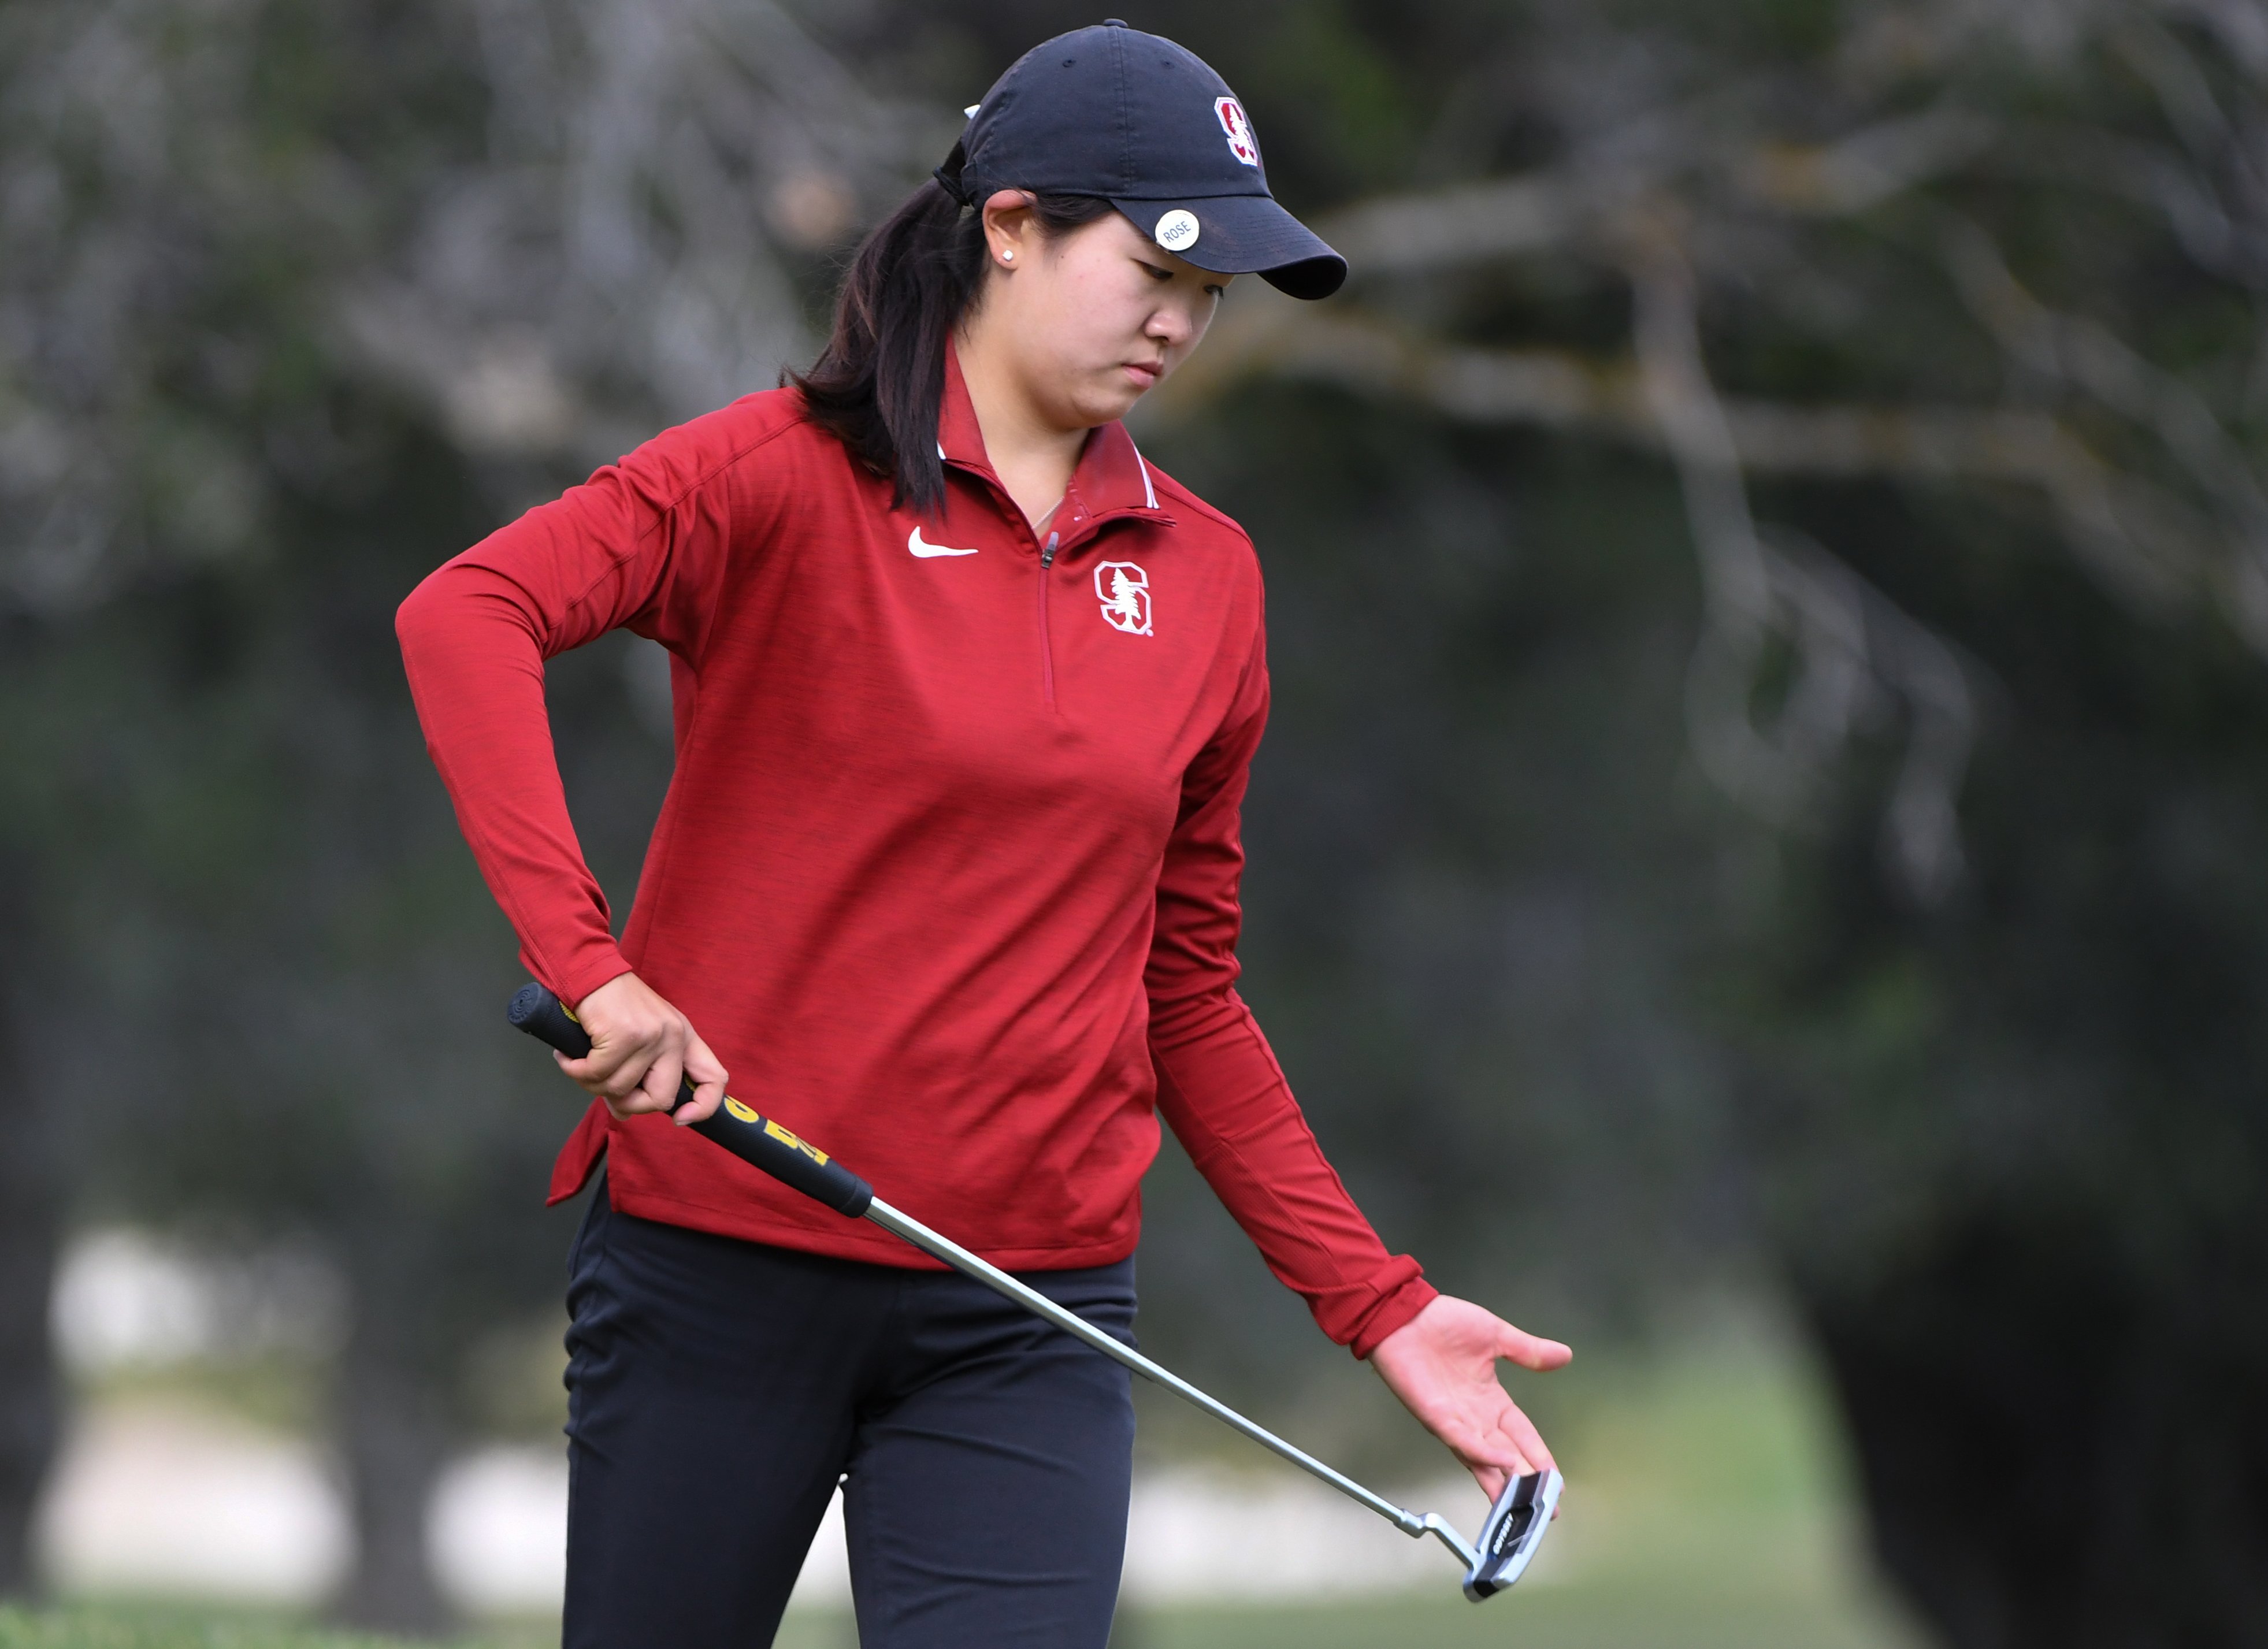 Girls’s golf bows out in NCAA semifinal, Zhang embarks on professional profession